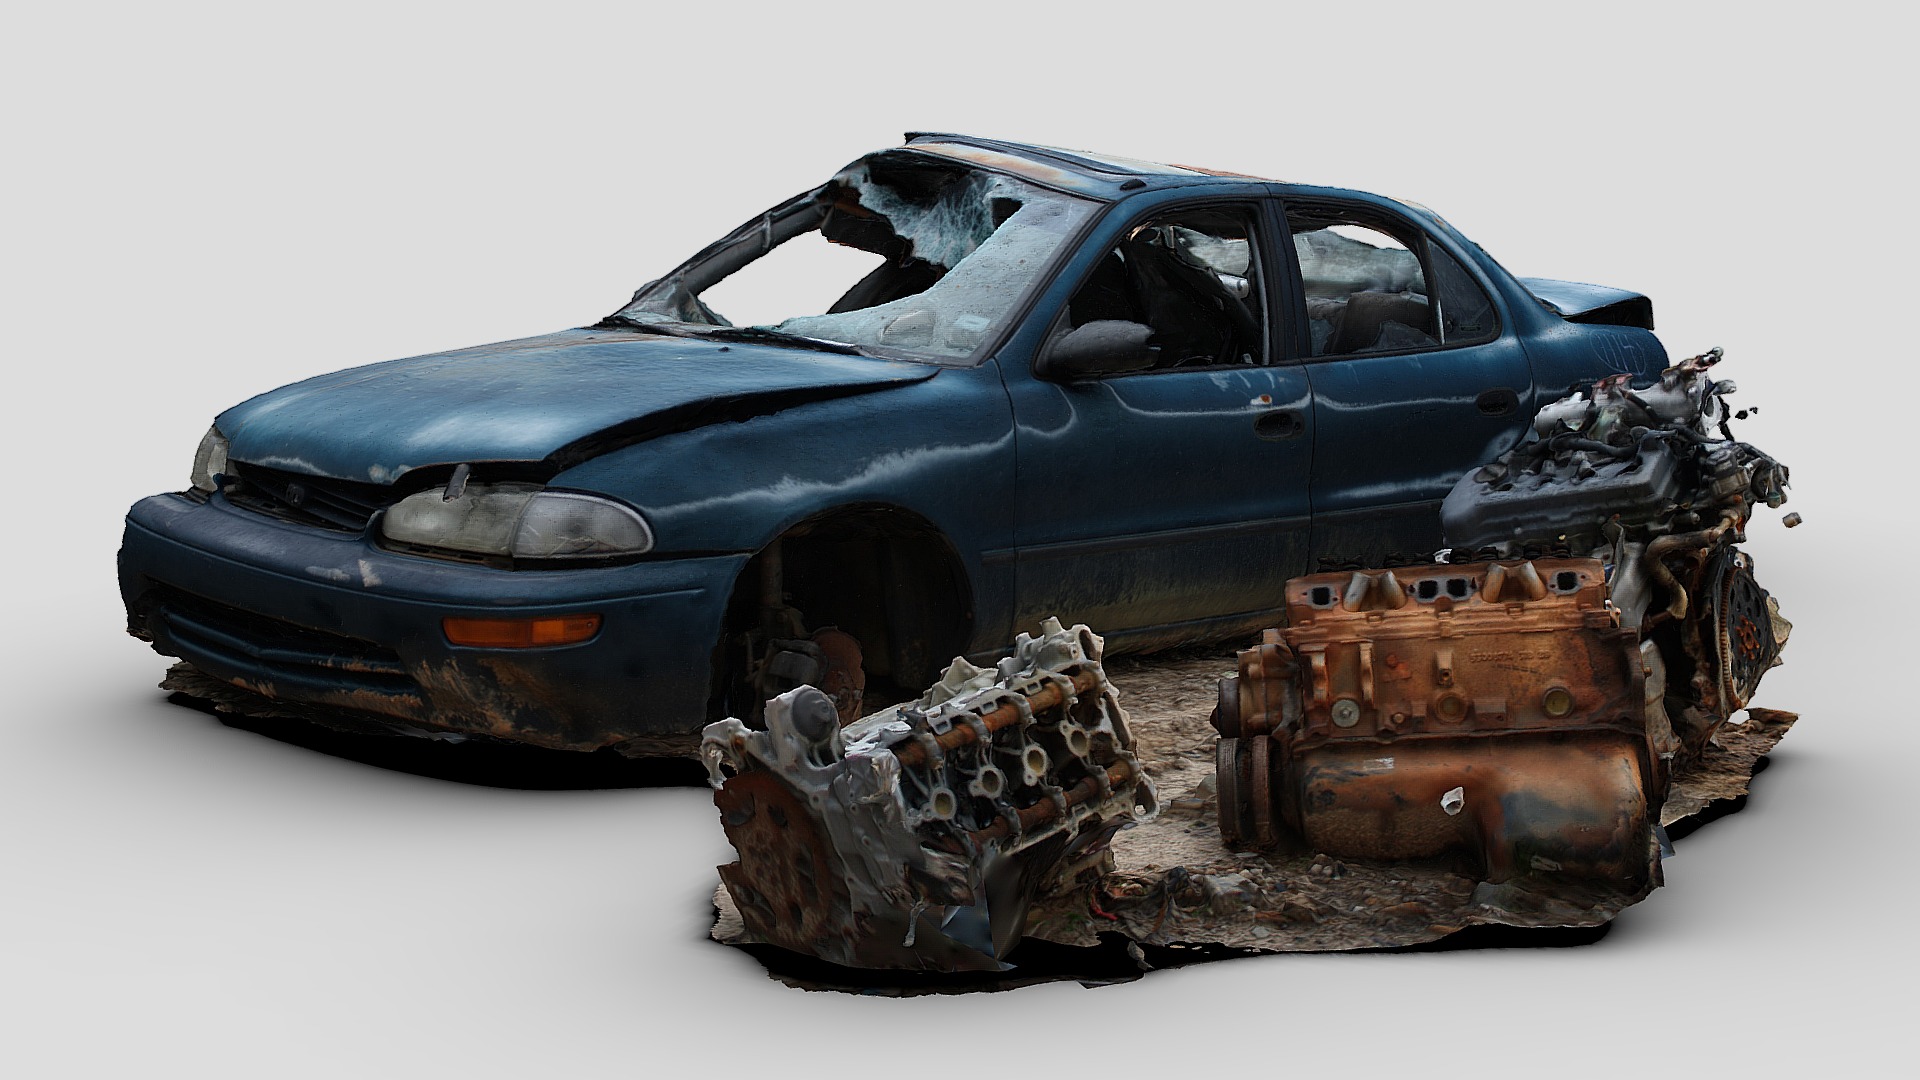 3D model Wreck with Engines (Raw Scan) - This is a 3D model of the Wreck with Engines (Raw Scan). The 3D model is about a blue car with a large engine.